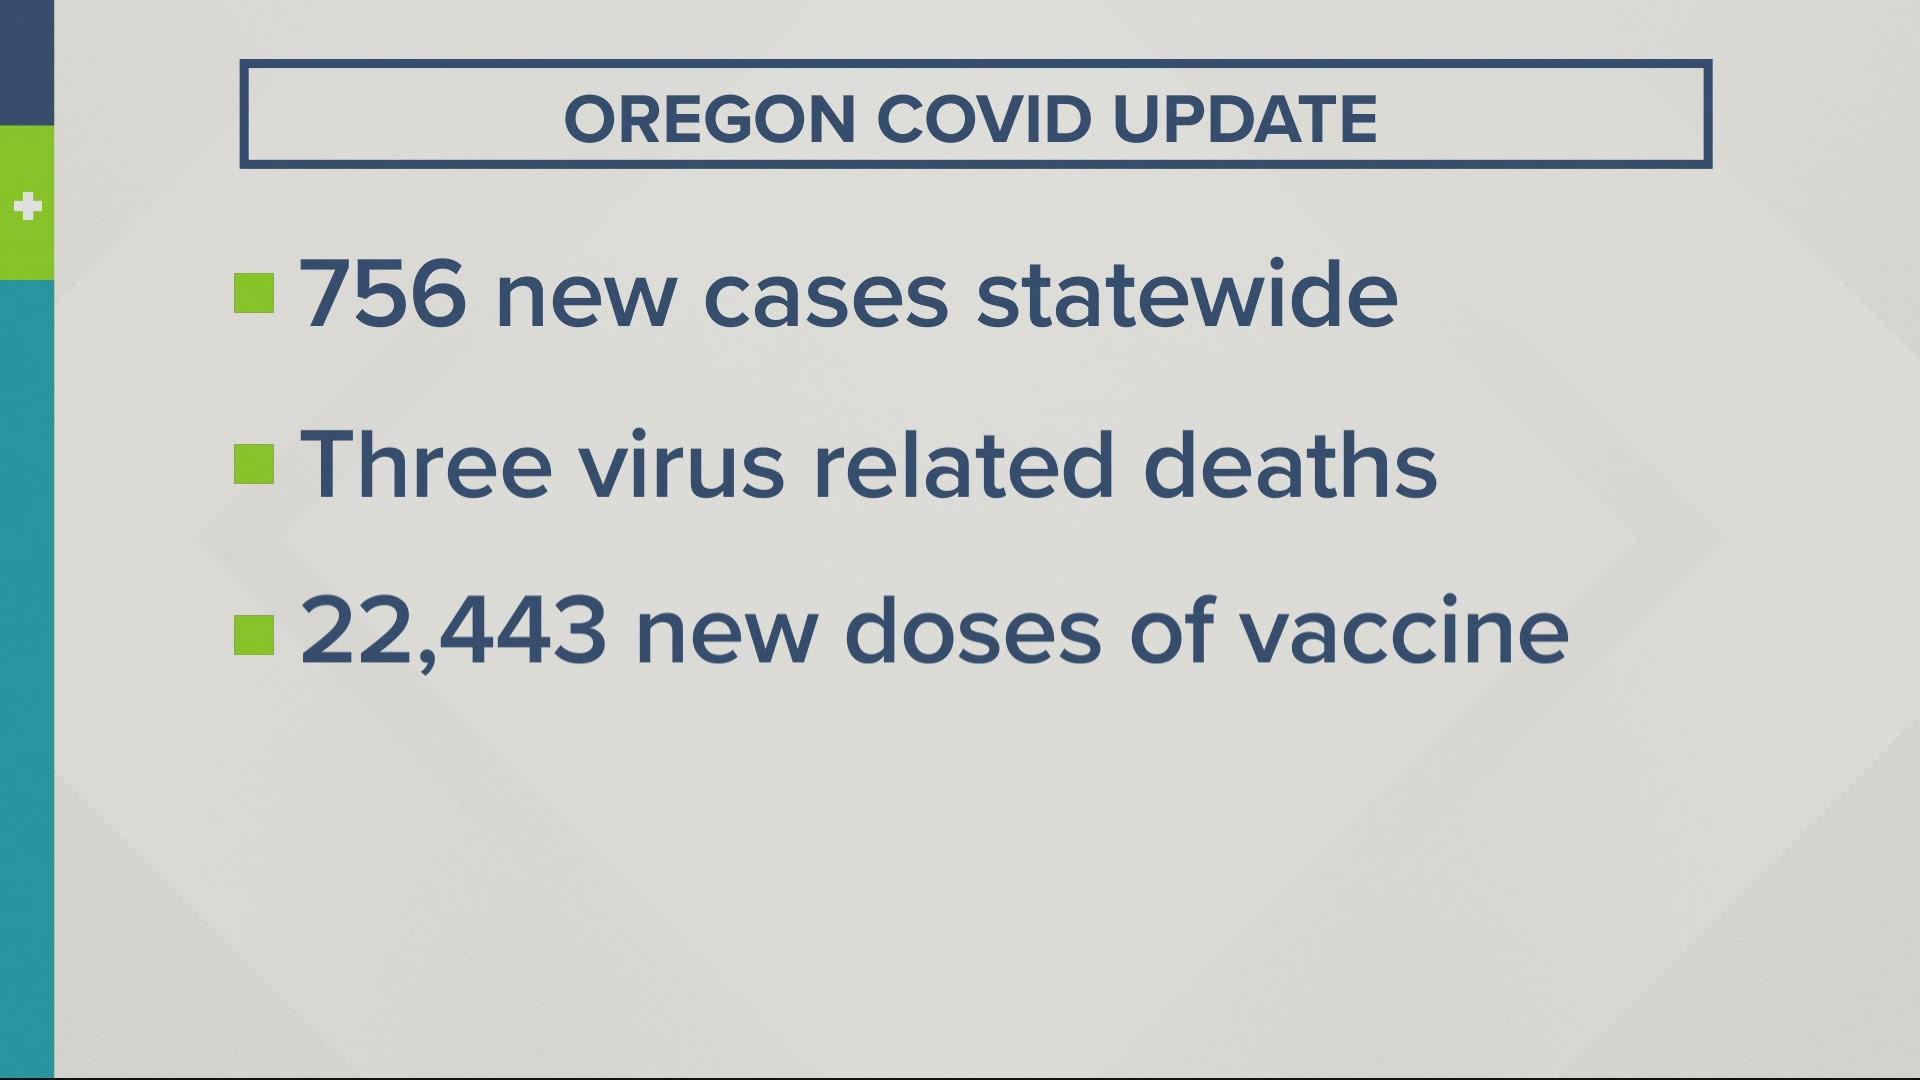 More than 2,500 Oregonians have died with COVID-19.